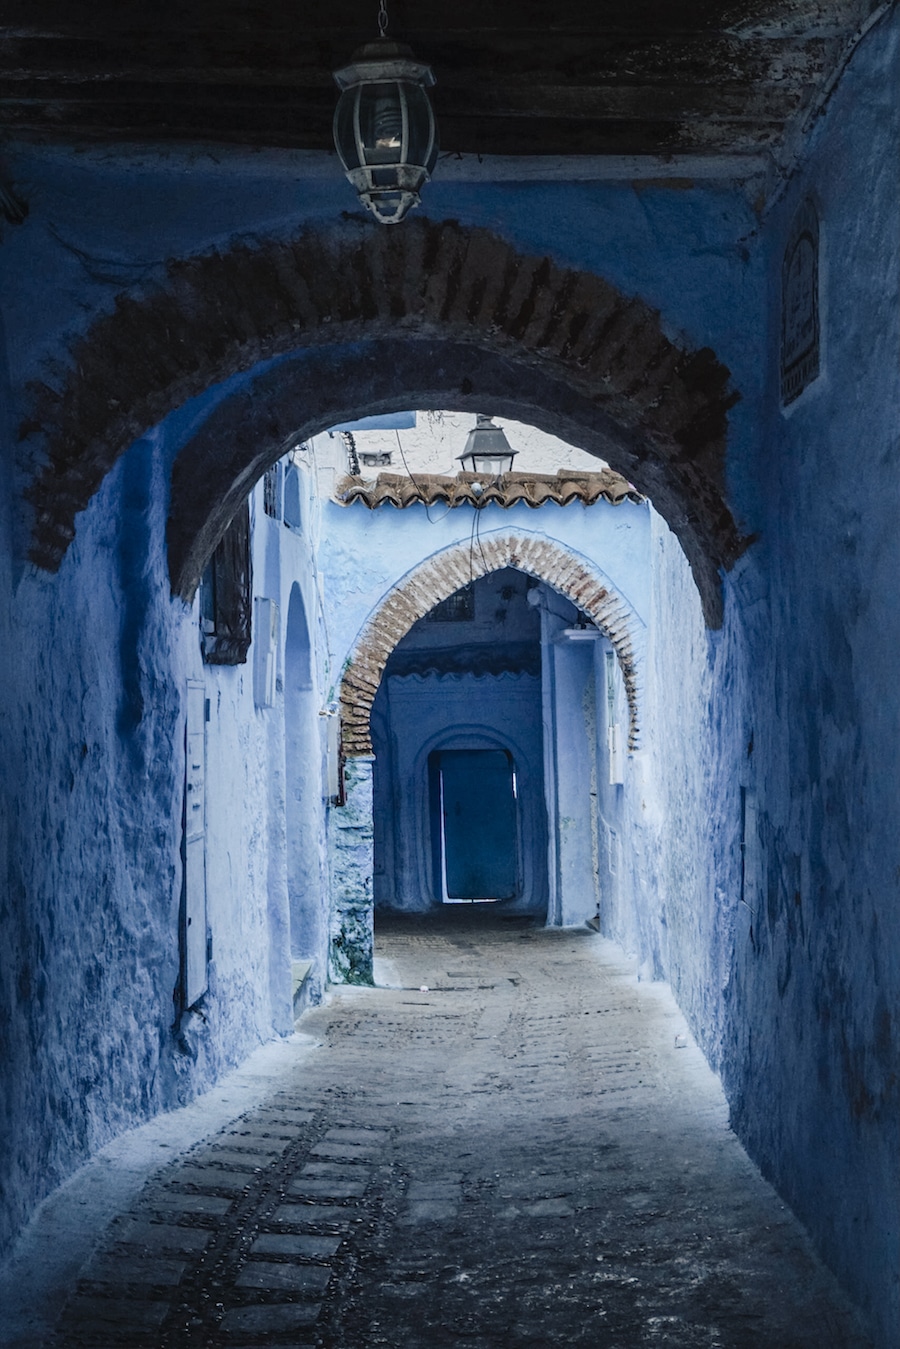 19 Photos to Inspire You to Visit Chefchaouen, Morocco